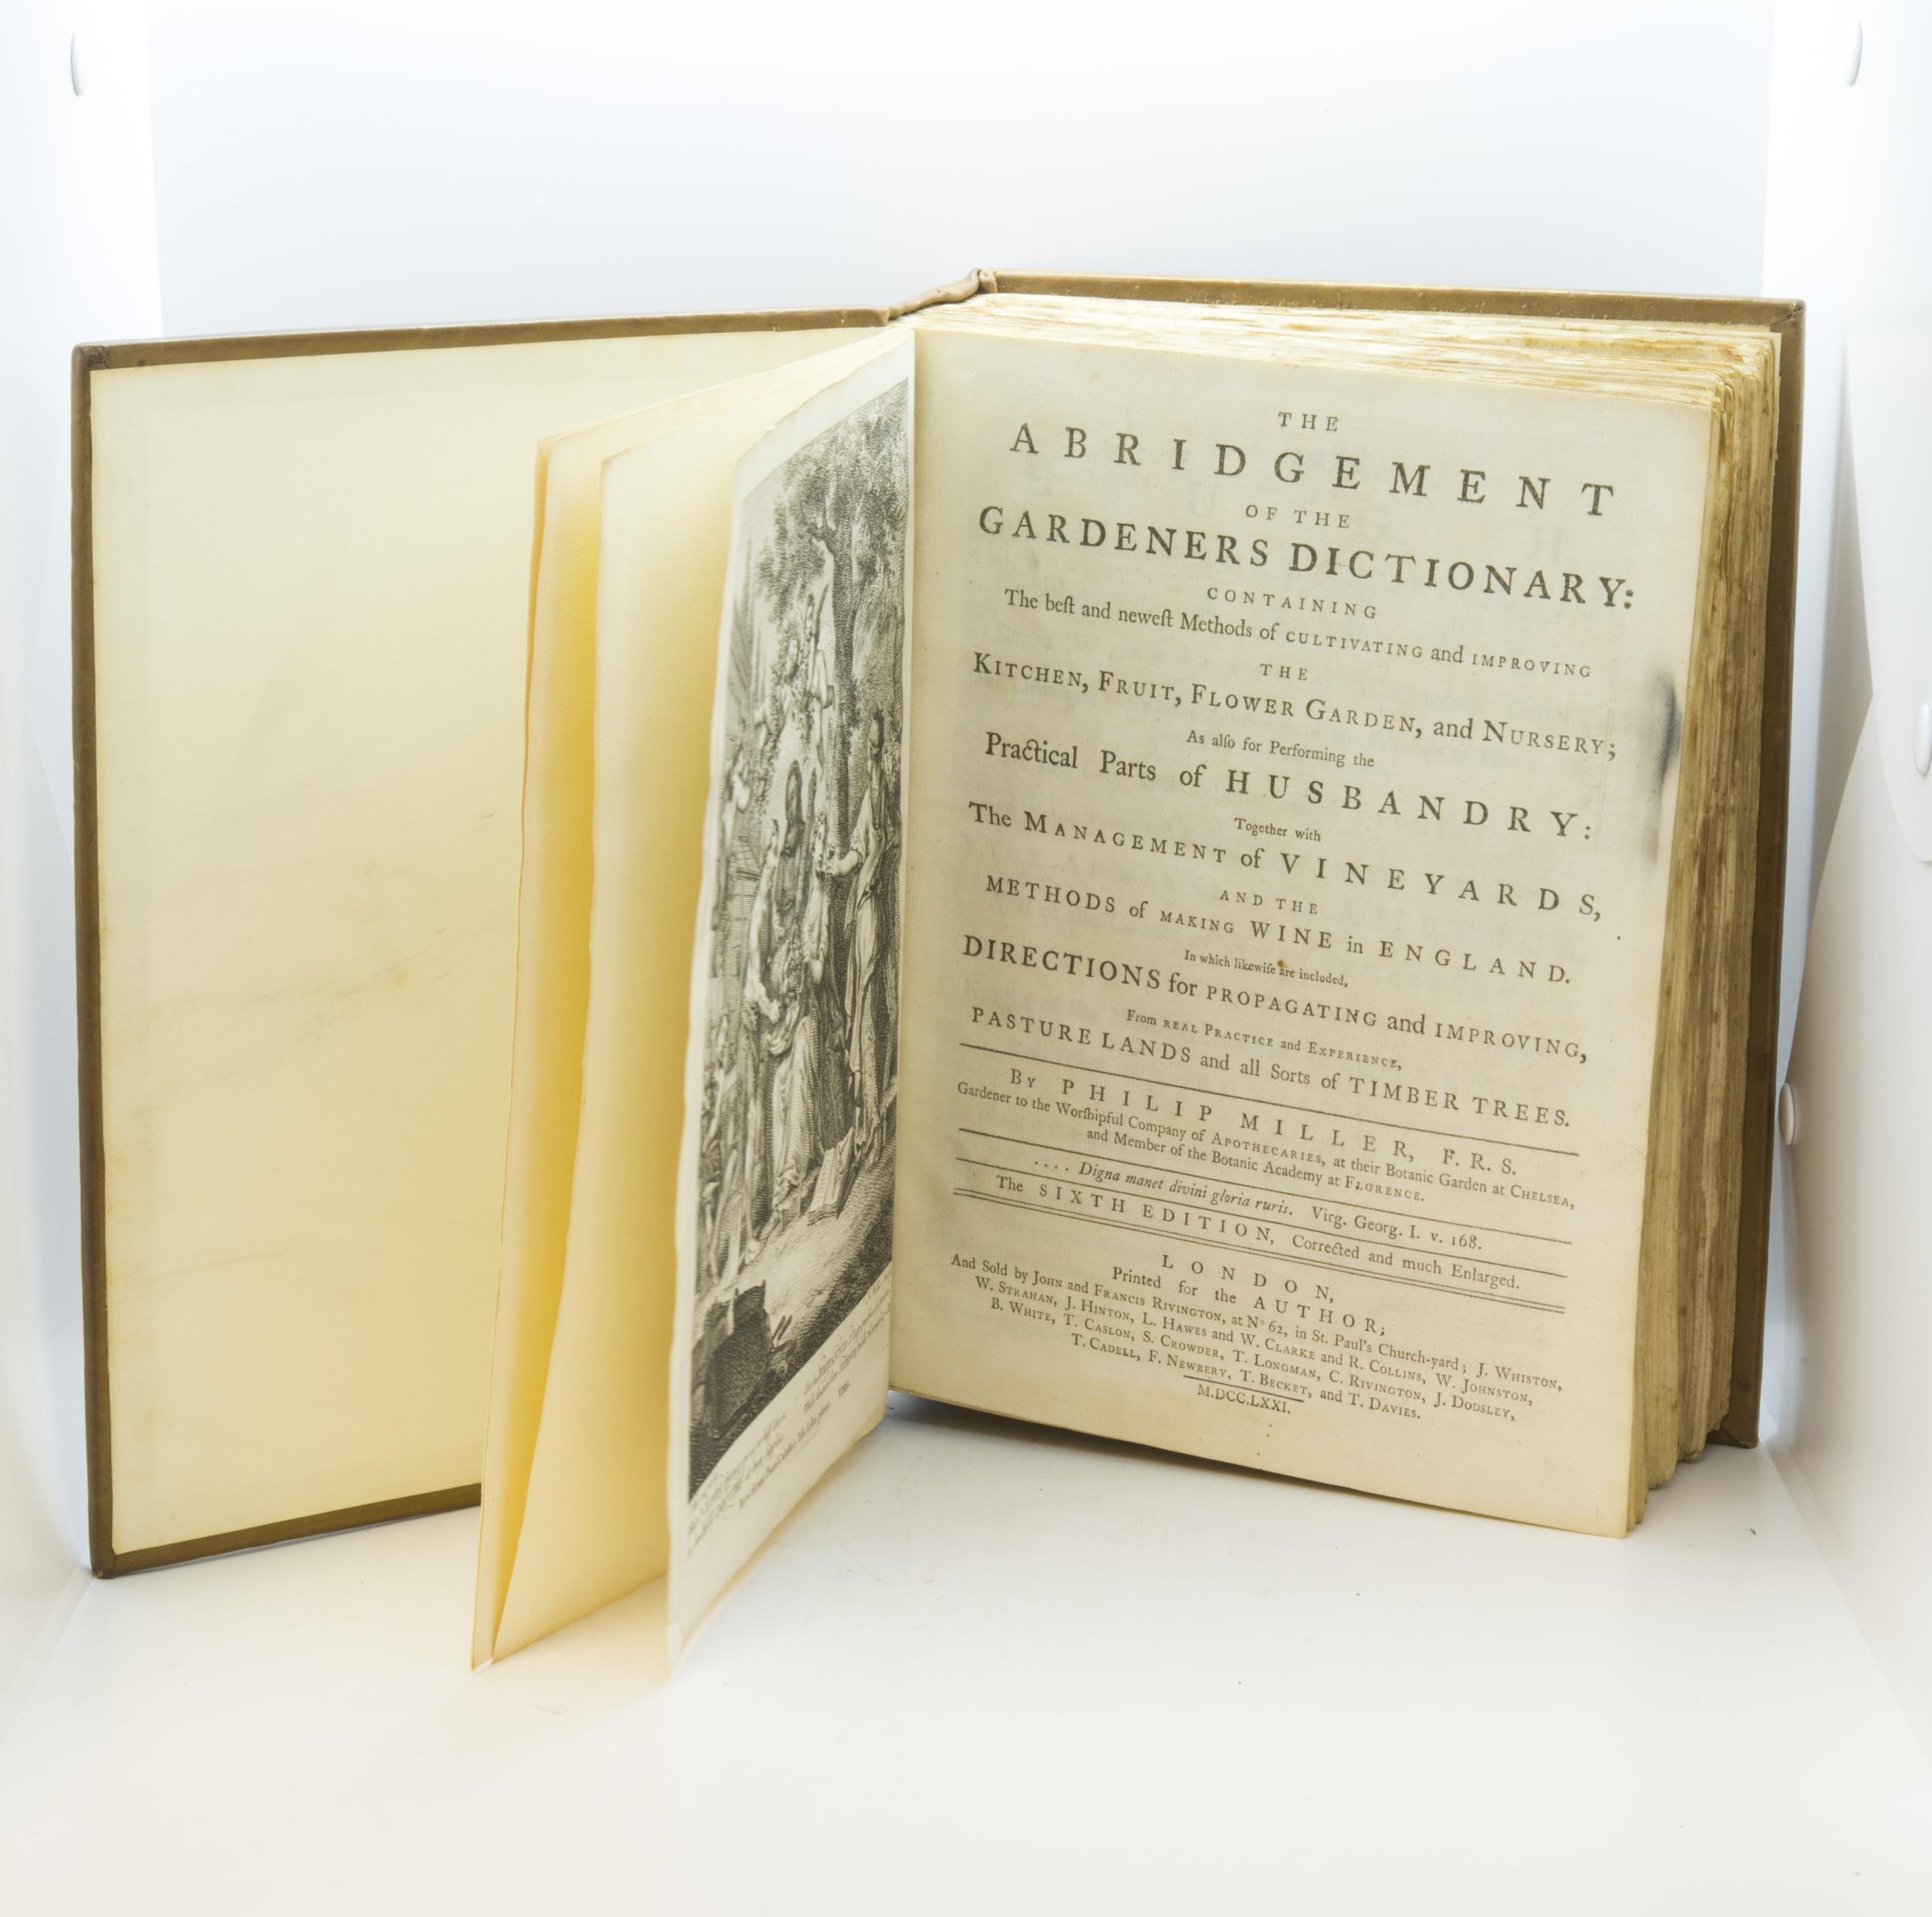 MILLER (PHILIP) THE ABRIDGEMENT TO THE GARDENERS DICTIONARY, sixth edition corrected and enlarged,